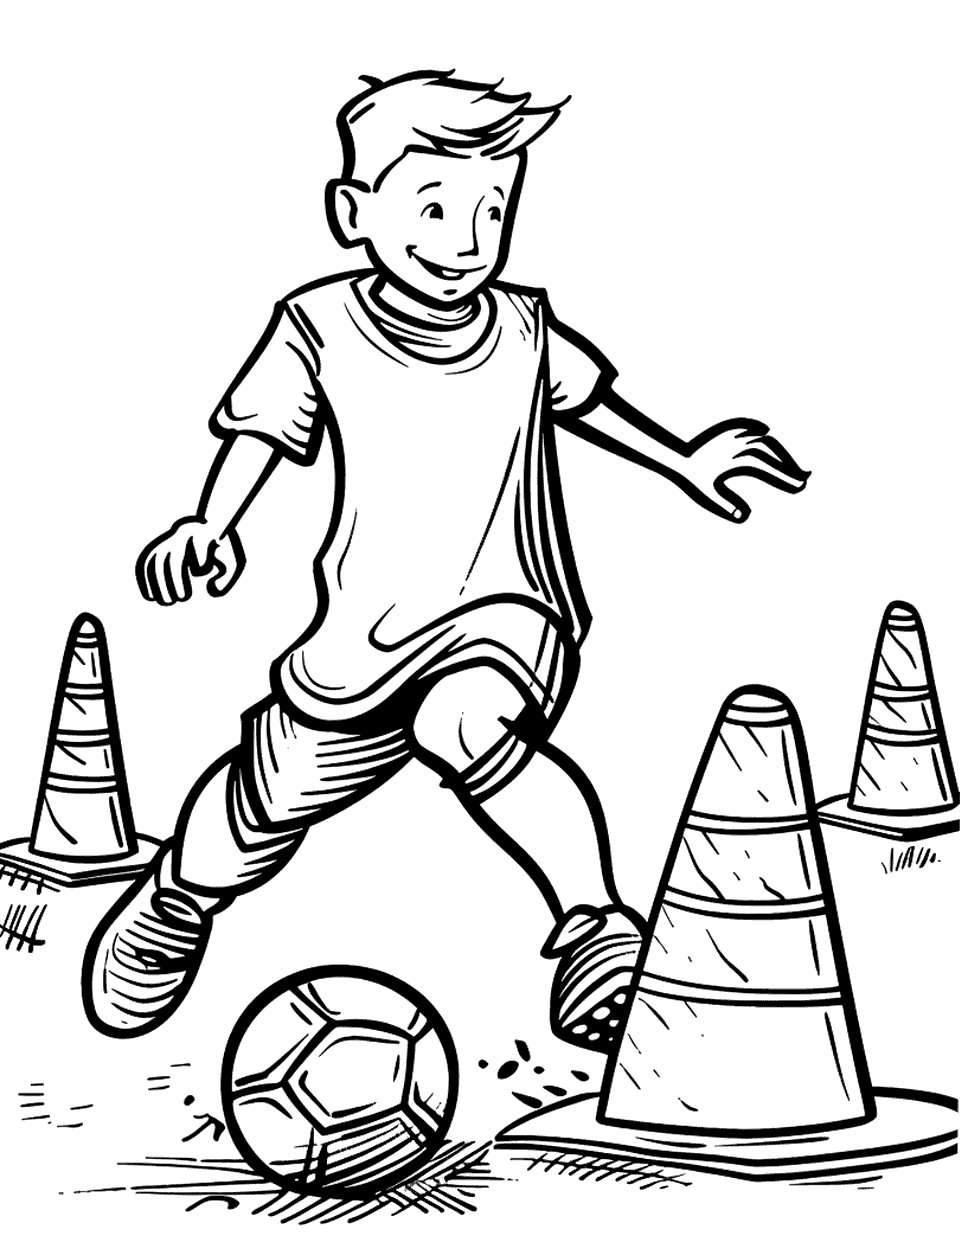 Soccer Skills Challenge Coloring Page - Kids participating in a soccer skills challenge, navigating through cones with the ball.